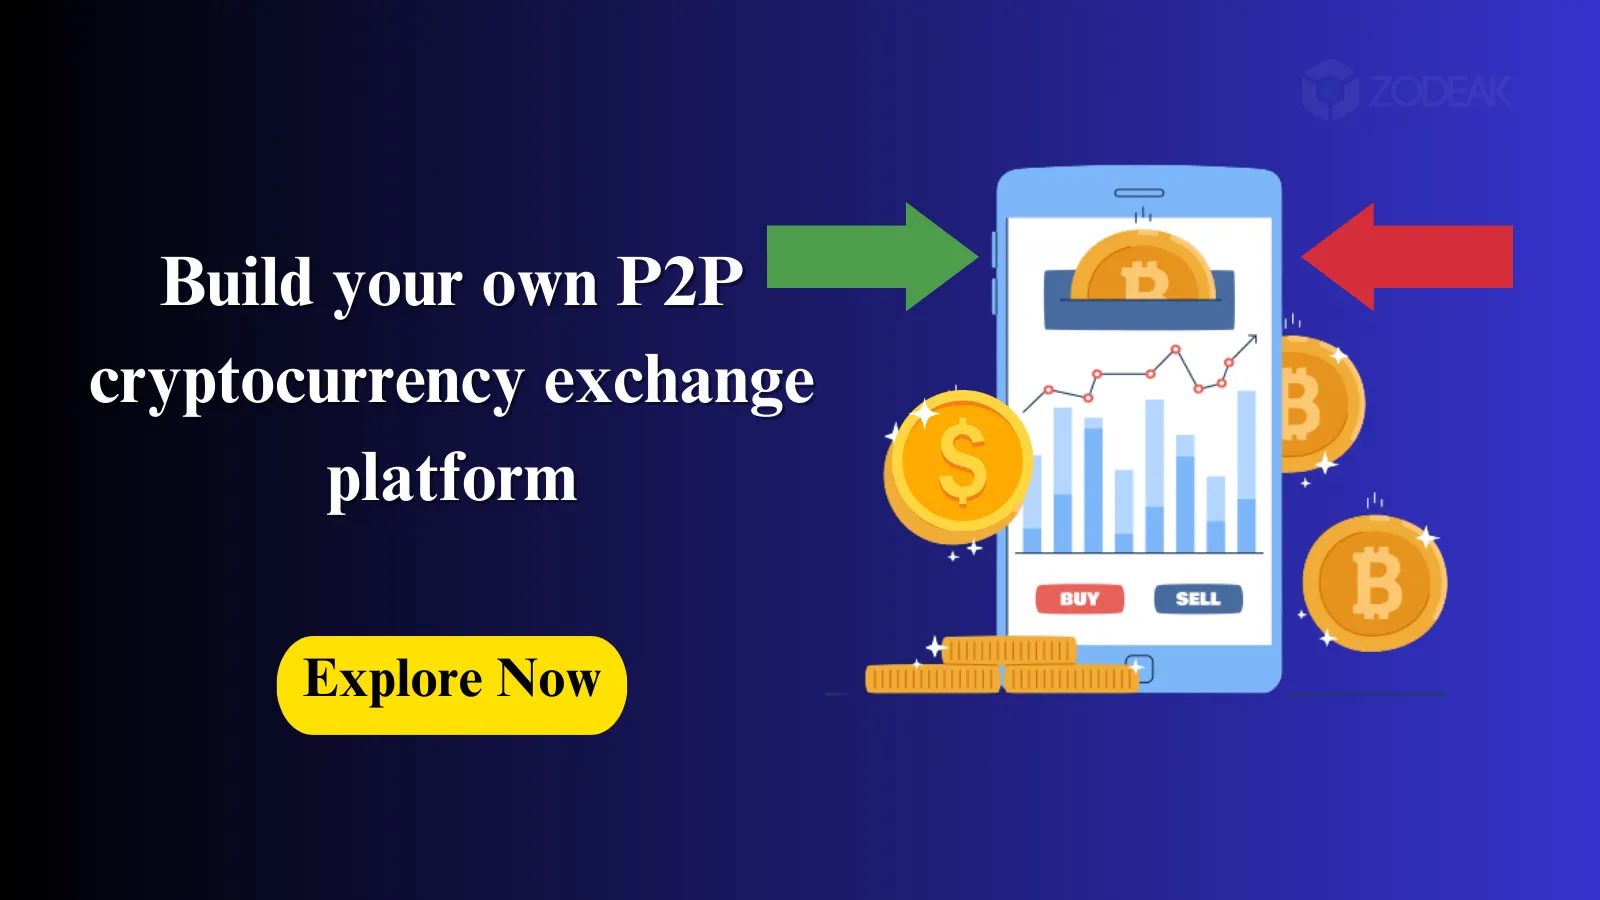 How to build your own P2P cryptocurrency exchange platform